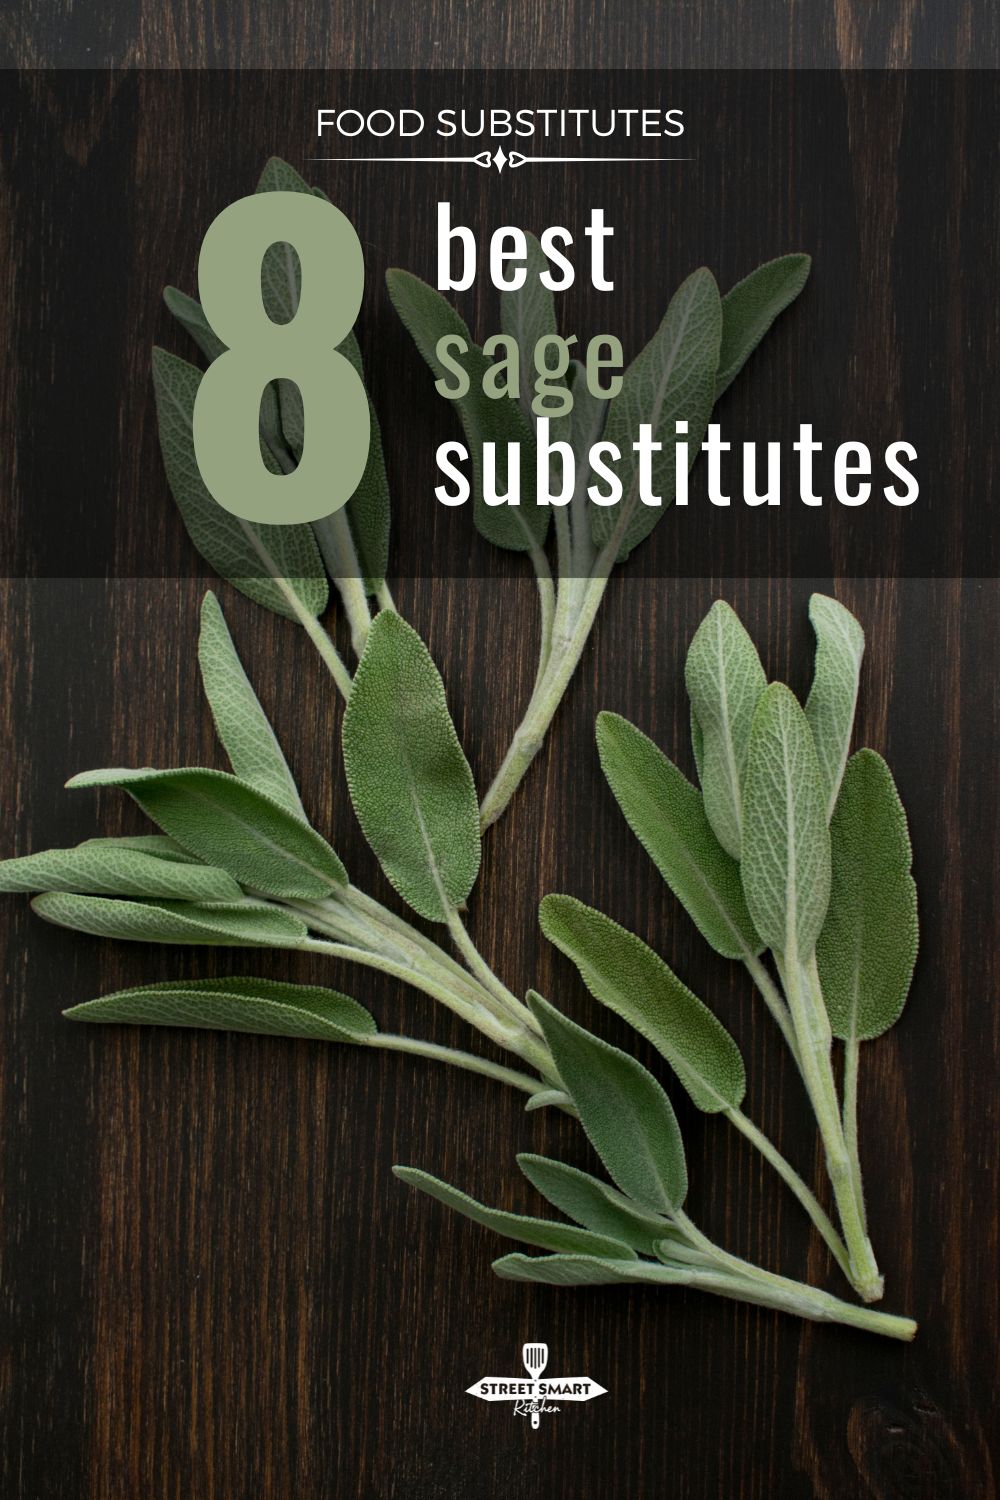 What are the best sage substitute options? Learn which herbs can create similar flavors to sage and how to substitute them properly.